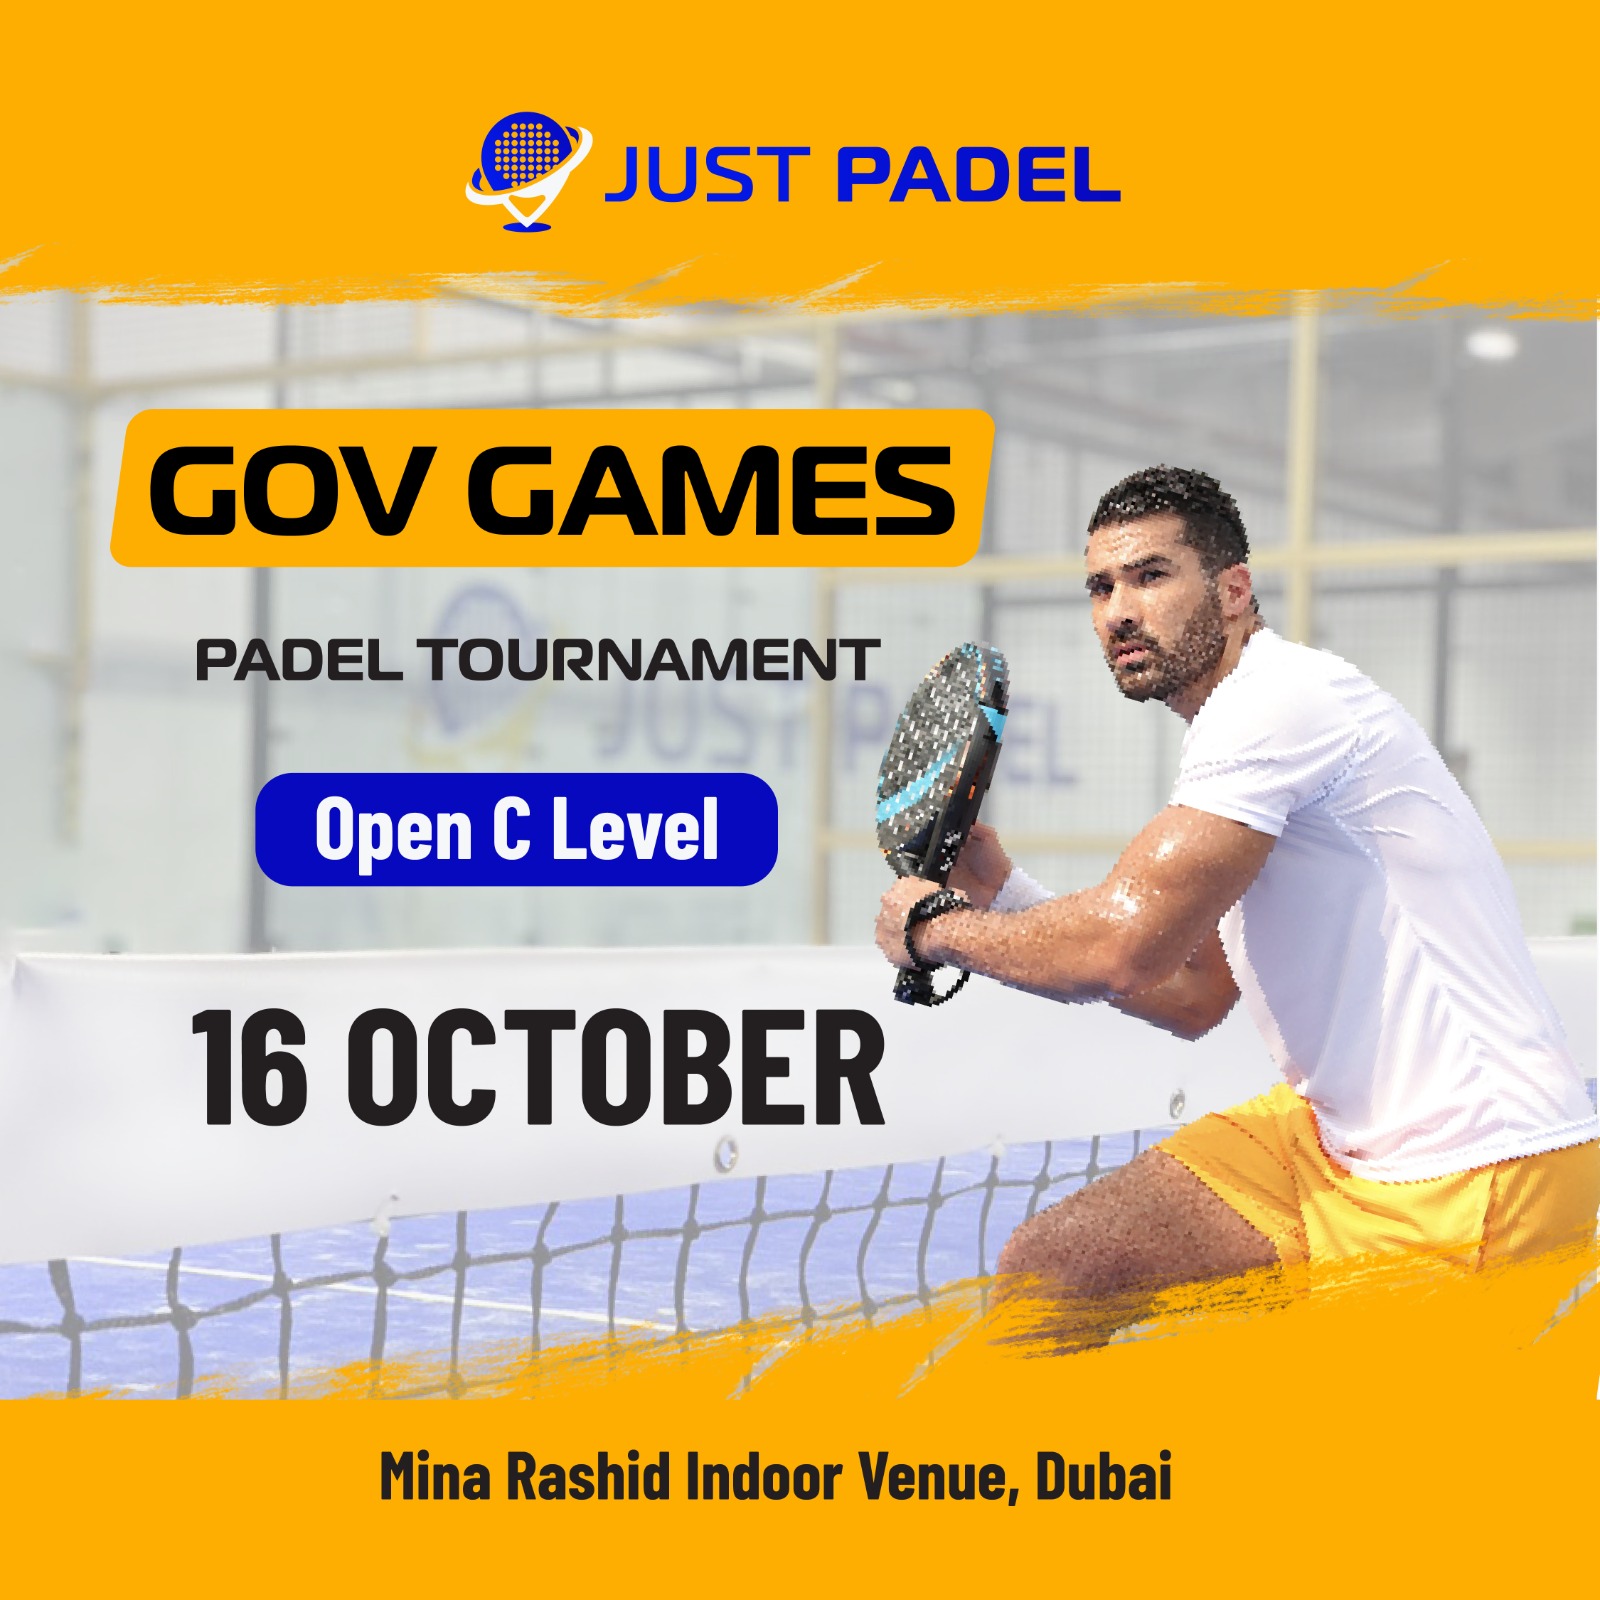 Gov Games Padel Tournament - Play with padel rackets